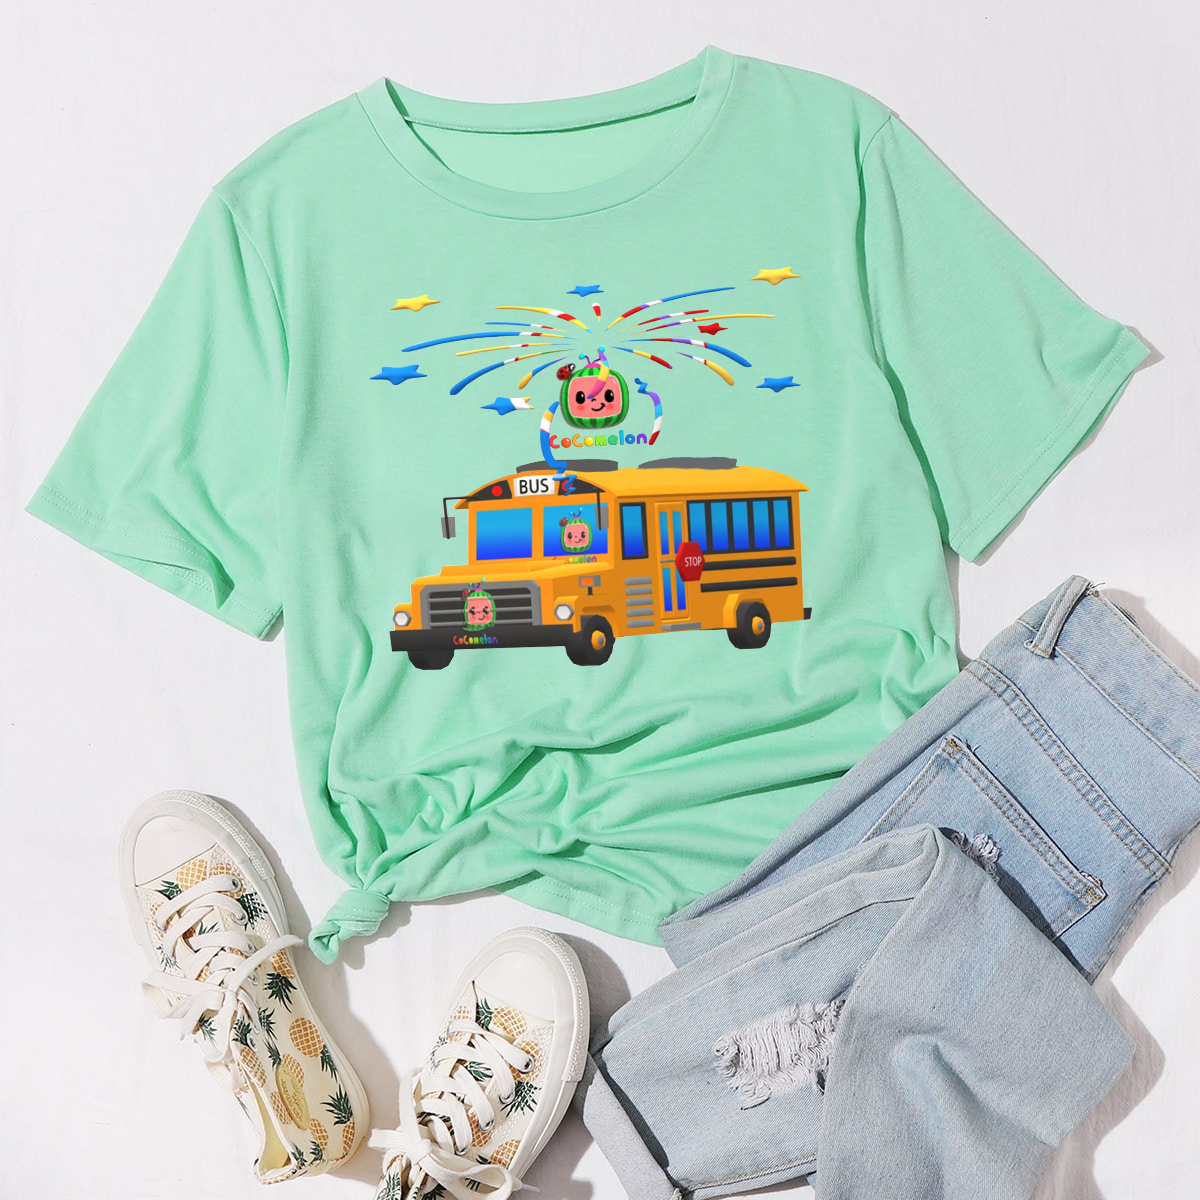 Cocomelon On The BUS shirt, go back to school shirt, School bus shirt, Watermelon school bus shirt, Cute kids shirt,First day of school tee